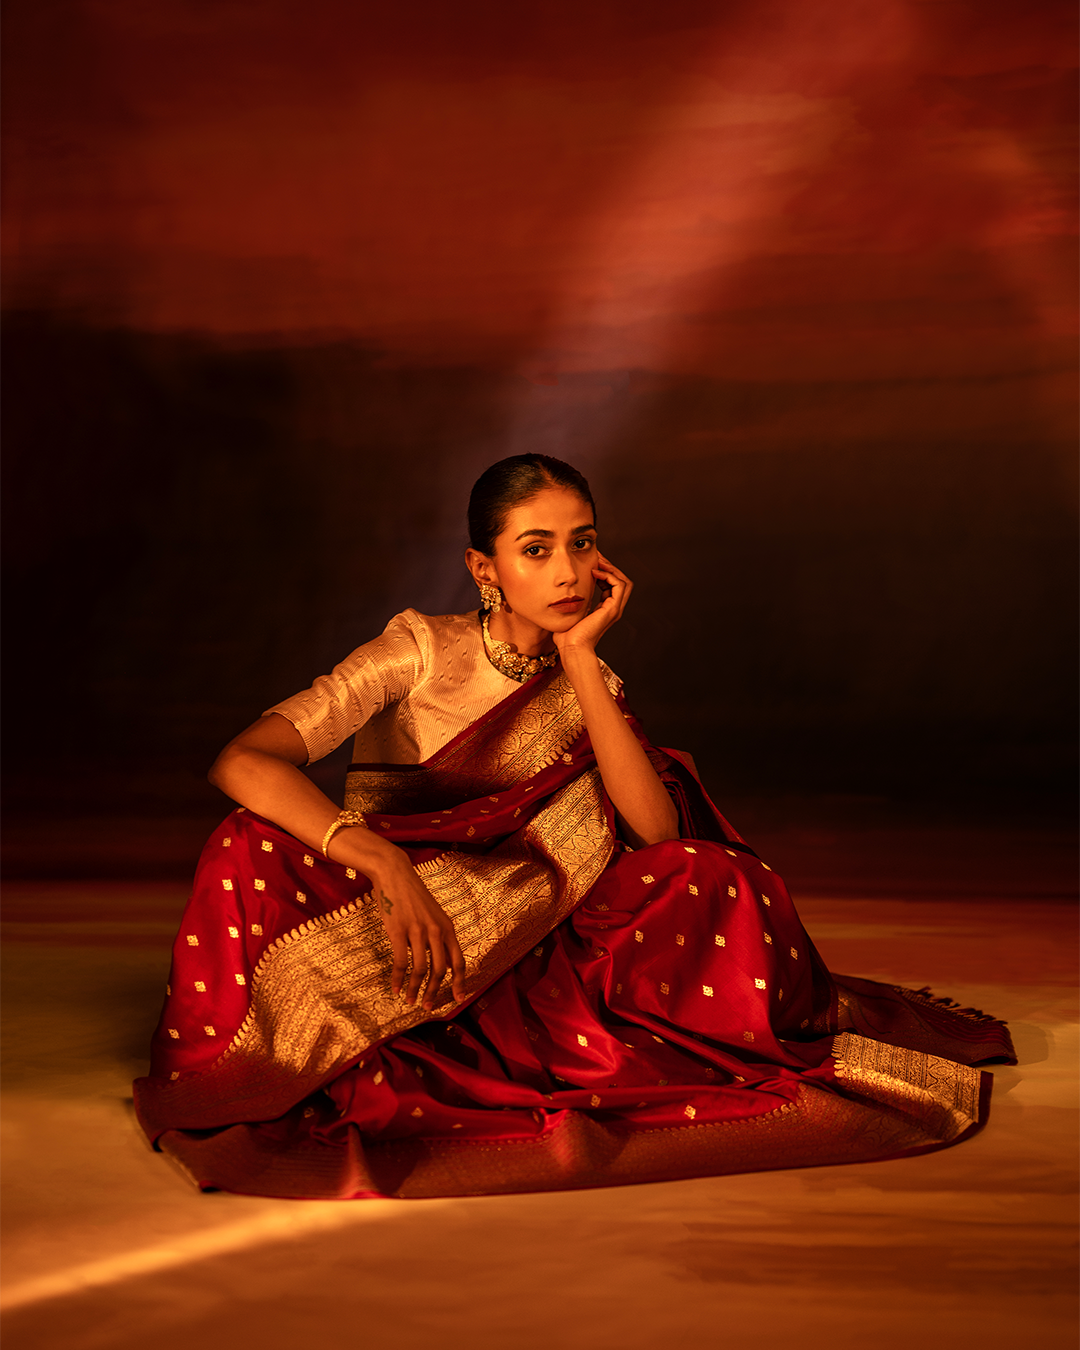 Kathak dancer sitting gracefully on the floor and performing. - SuperStock